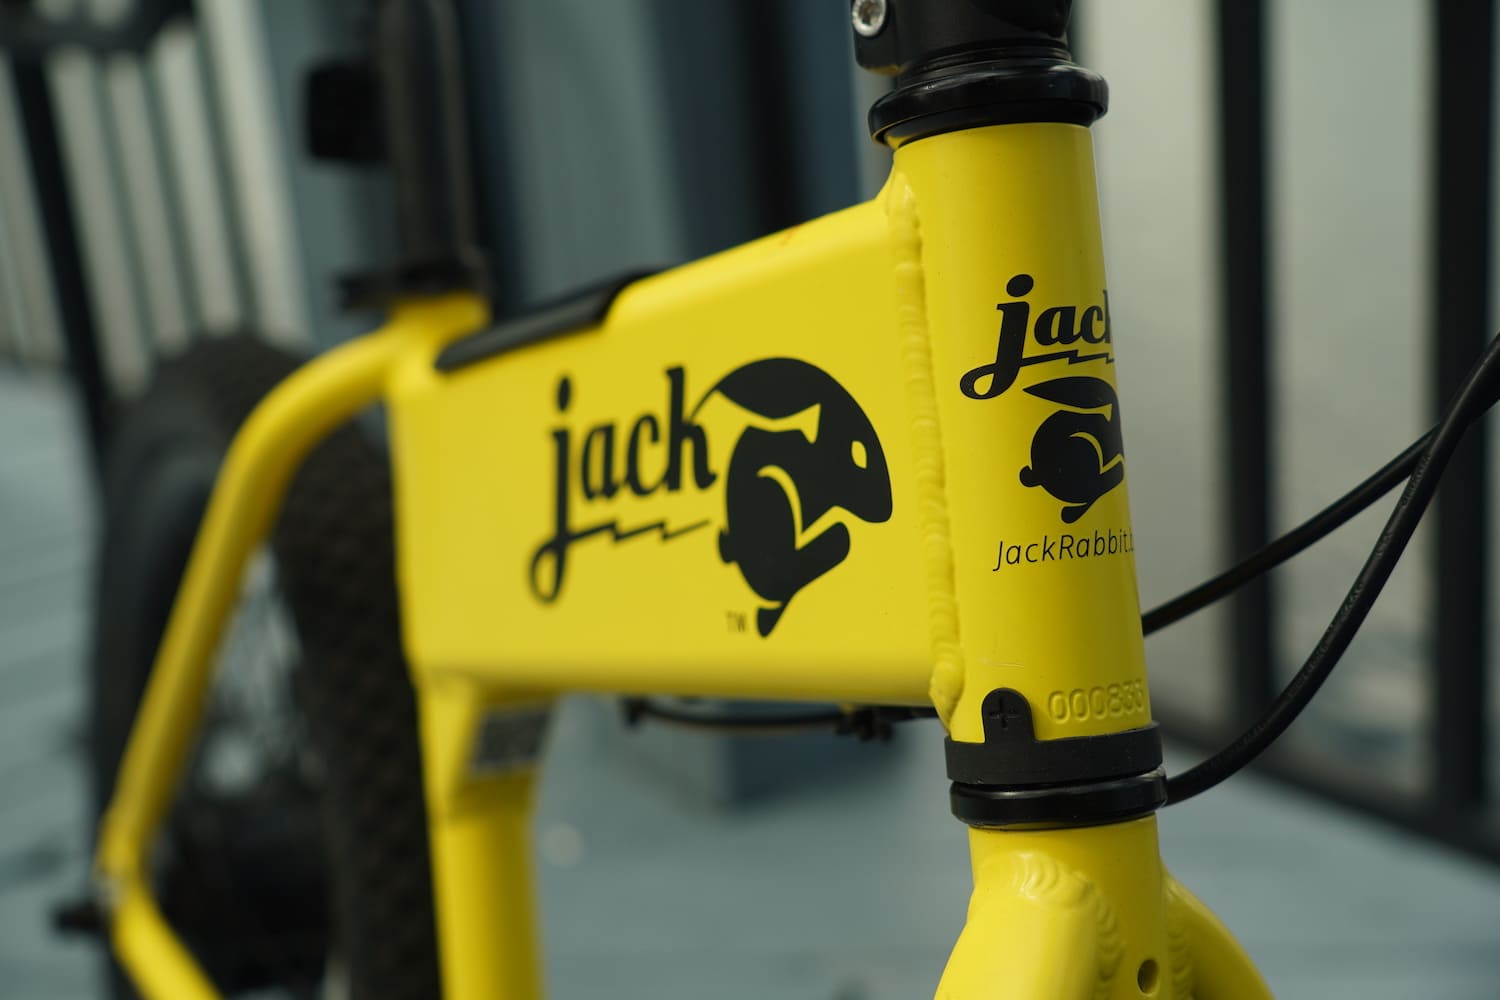 JackRabbit review: This odd-looking 20 mph 'micro electric bike' is